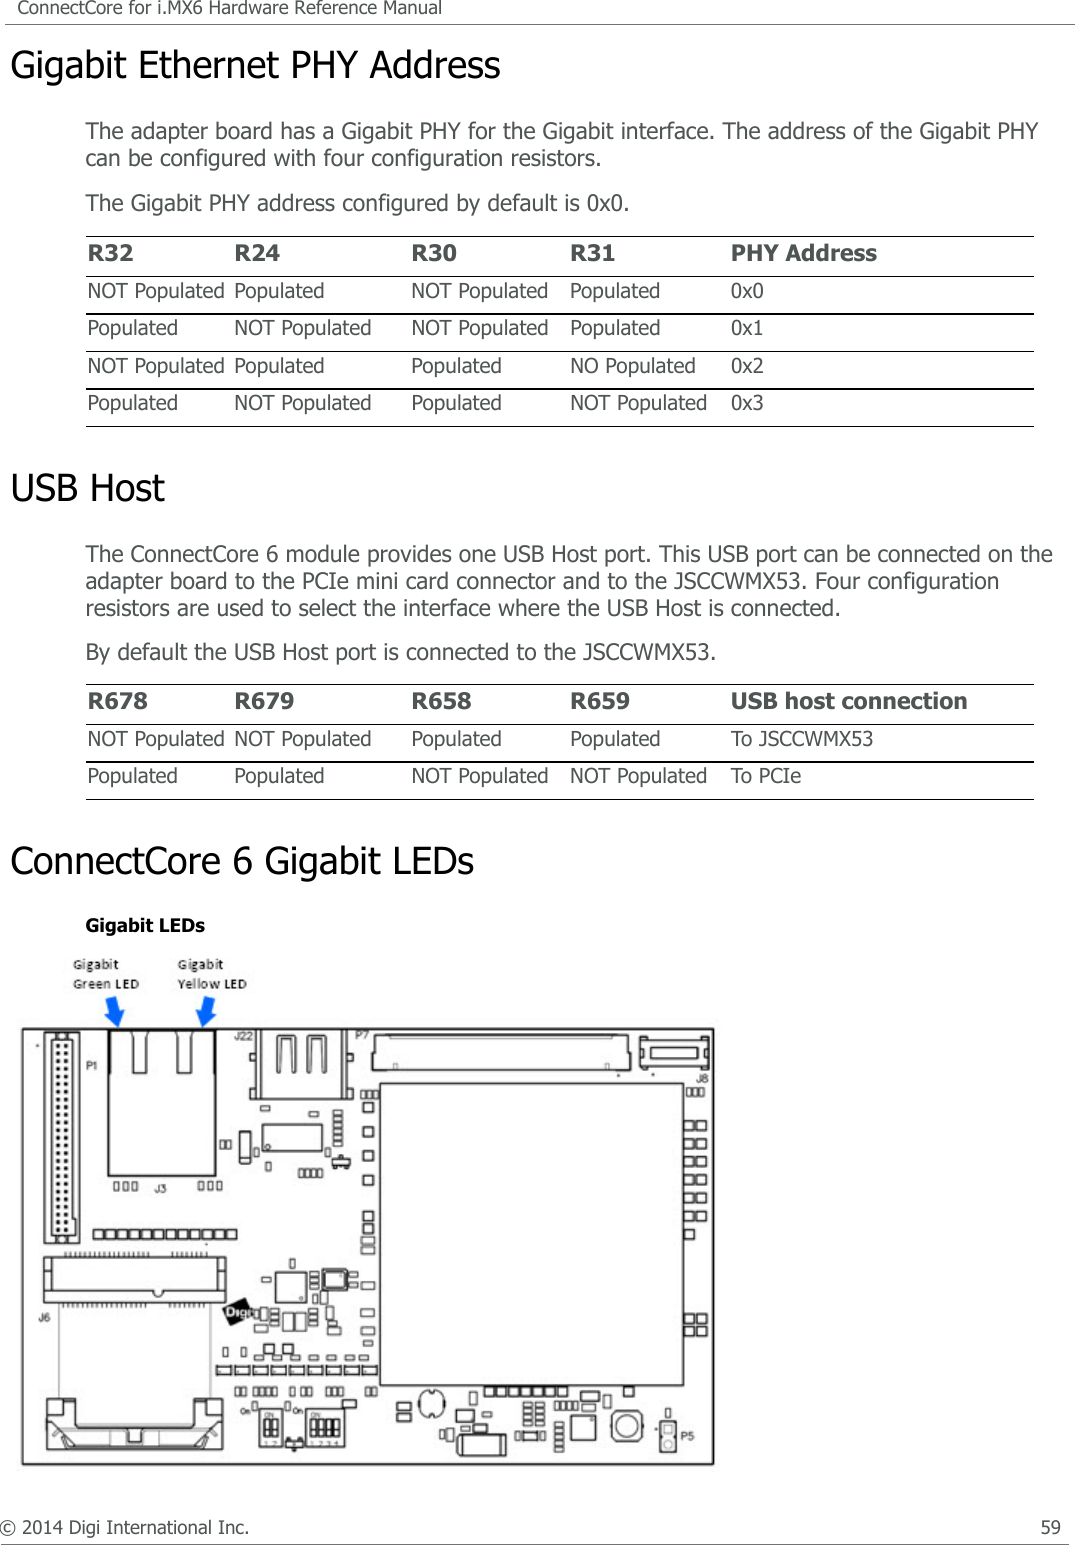 © 2014 Digi International Inc.      57ConnectCore for i.MX6 Hardware Reference ManualThe following table shows the interfaces connected to the I2C3 bus.(1) The JSCCWMX53 has an HDMI transmitter. This device is not used because an HDMI transmitter is already integrated on the ConnectCore 6 module.(2) The JSCCWMX53 has an EM3027 RTC device. This device is not used because an RTC controller is already integrated on the ConnectCore 6 module.Boot Switches for the ConnectCore 6Boot SwitchesInterface Speed (Kbps) Address CommentHDMI EDID 100 0x50 Read only accessesHDMI Transmitter 400 0x38, 0x39, 0x3F Not used (1)MIPI Camera - - Depend on display usedPCIe mini card - - Depend on PCIe card usedParallel LCD (touch) - - Depend on the LCD usedAudio CODEC 400 0x0A Address of SGTL5000Peripheral Connector - - Depends on the device connectedRTC (2) 400 0x56 Address of EM3027 RTCI2C connector - - Depends on the device connected